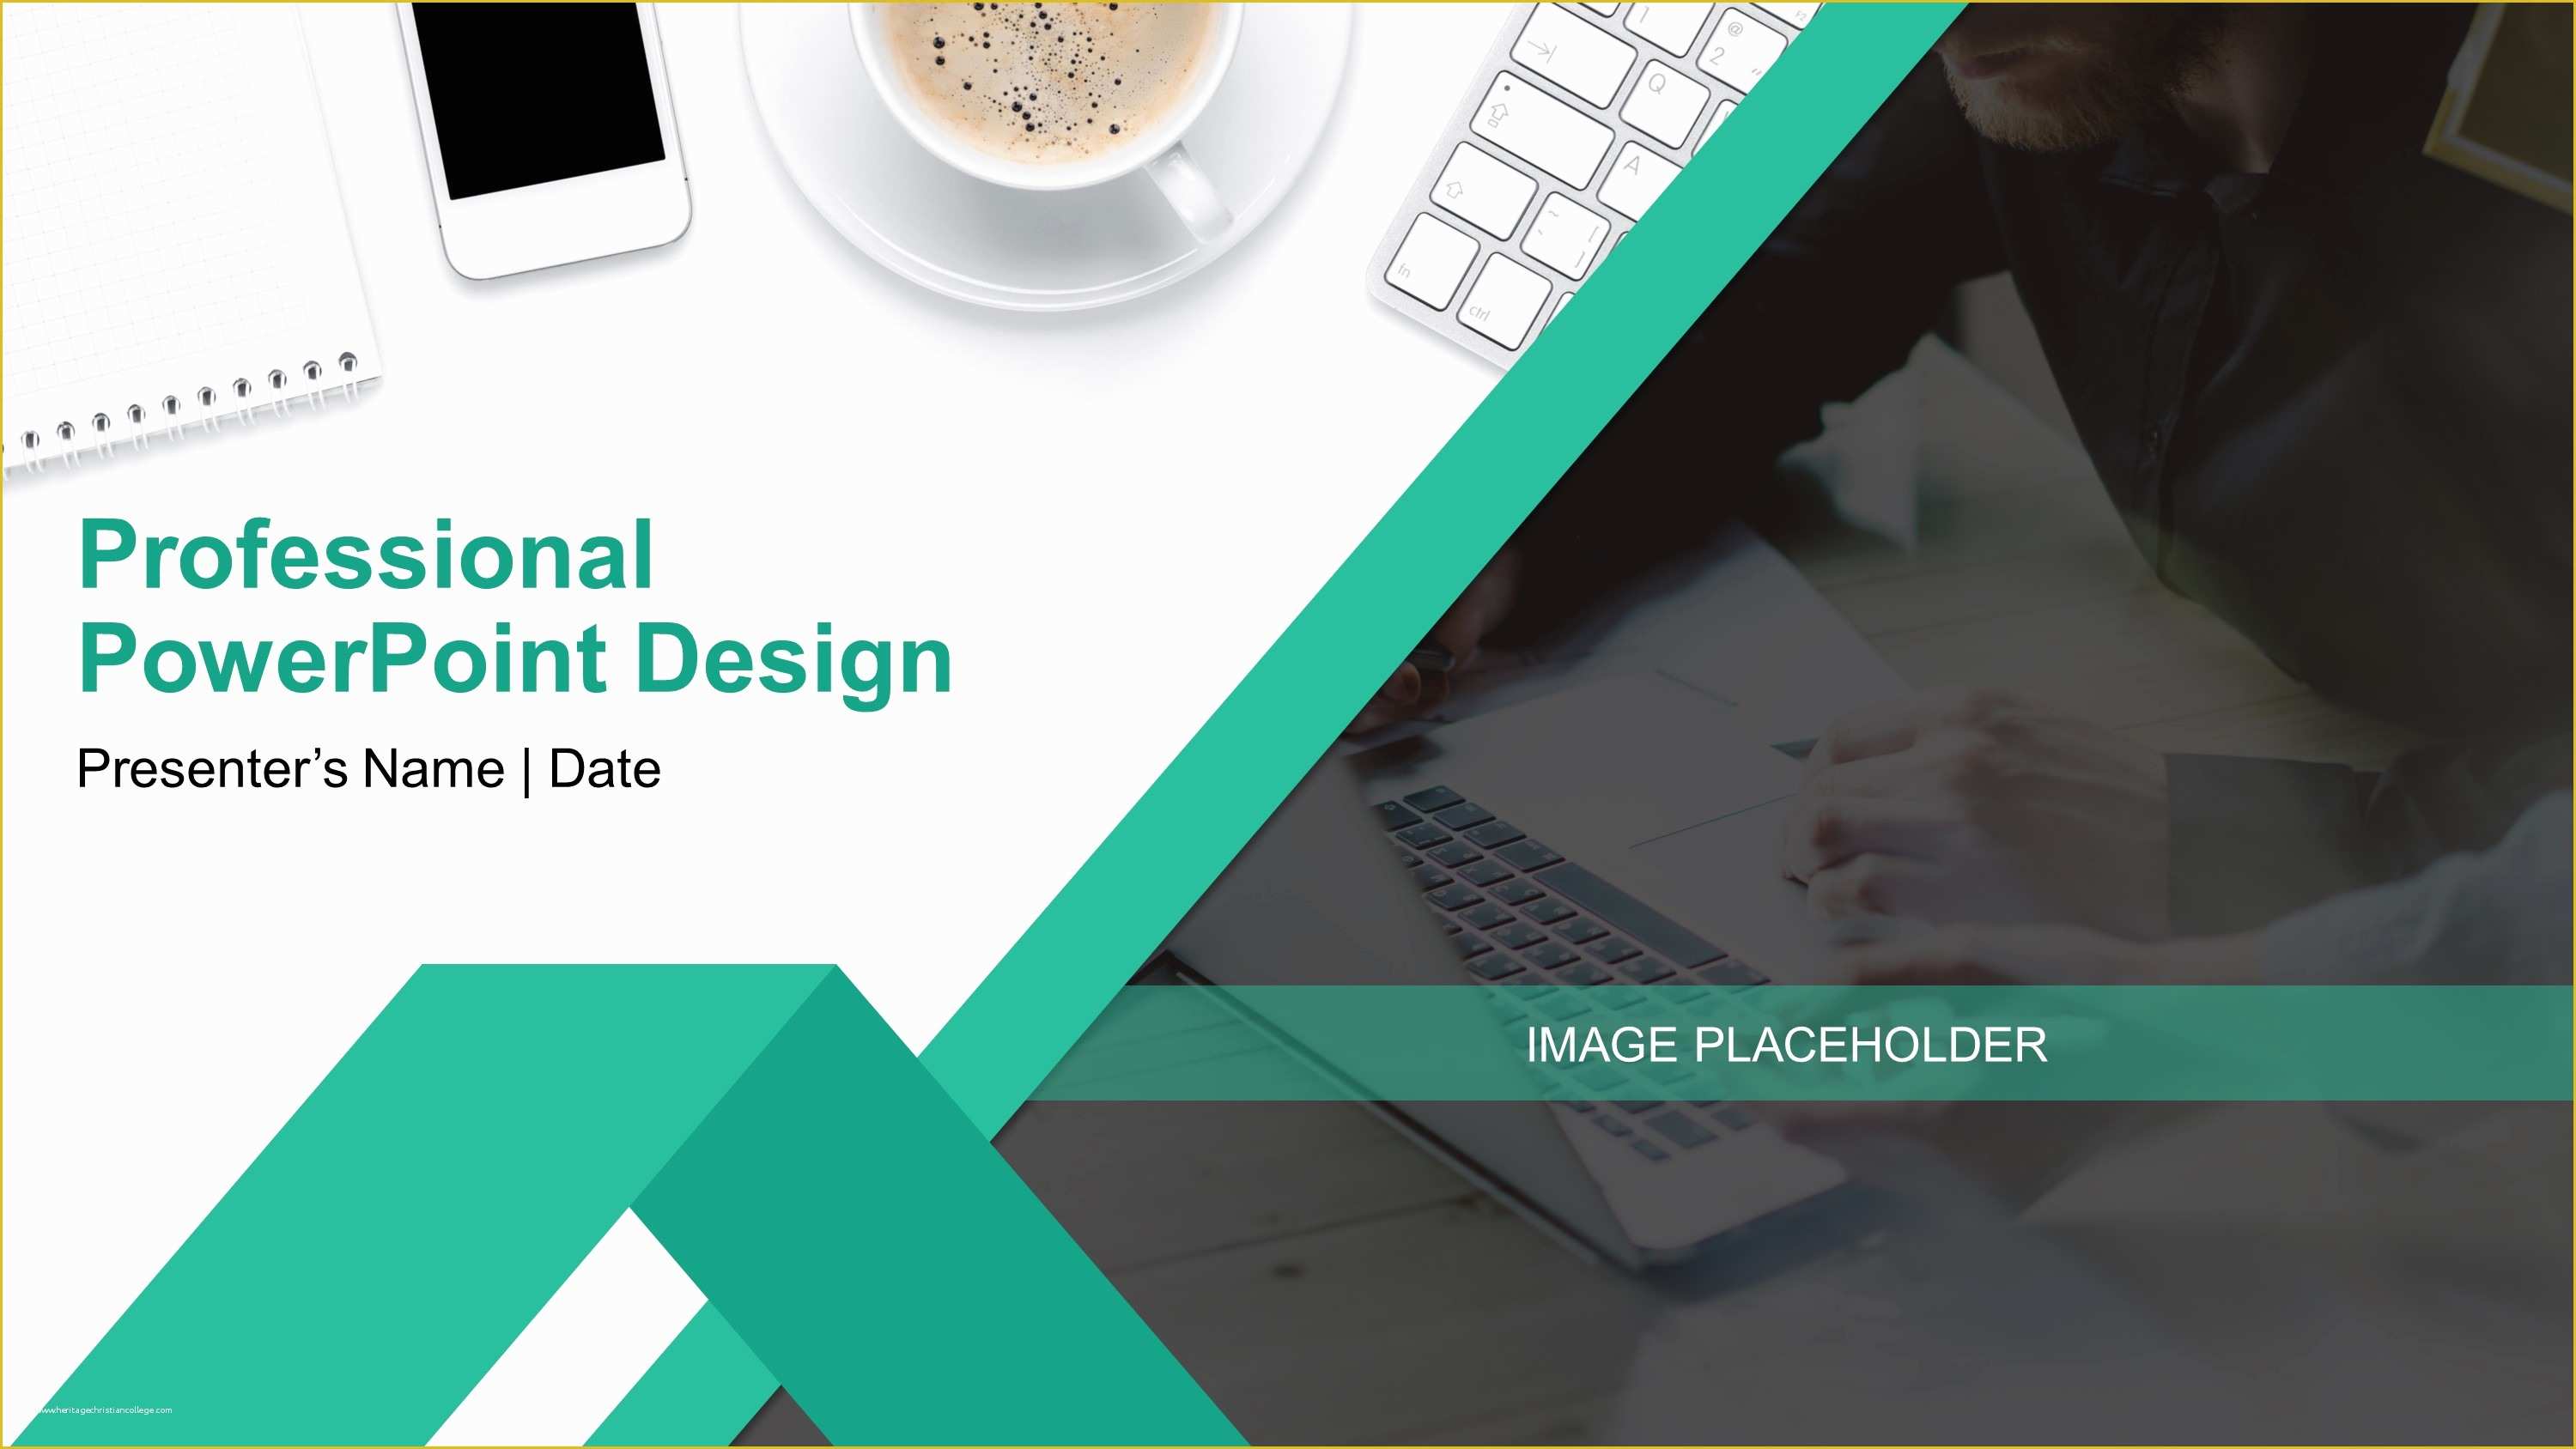 ppt presentation template free download